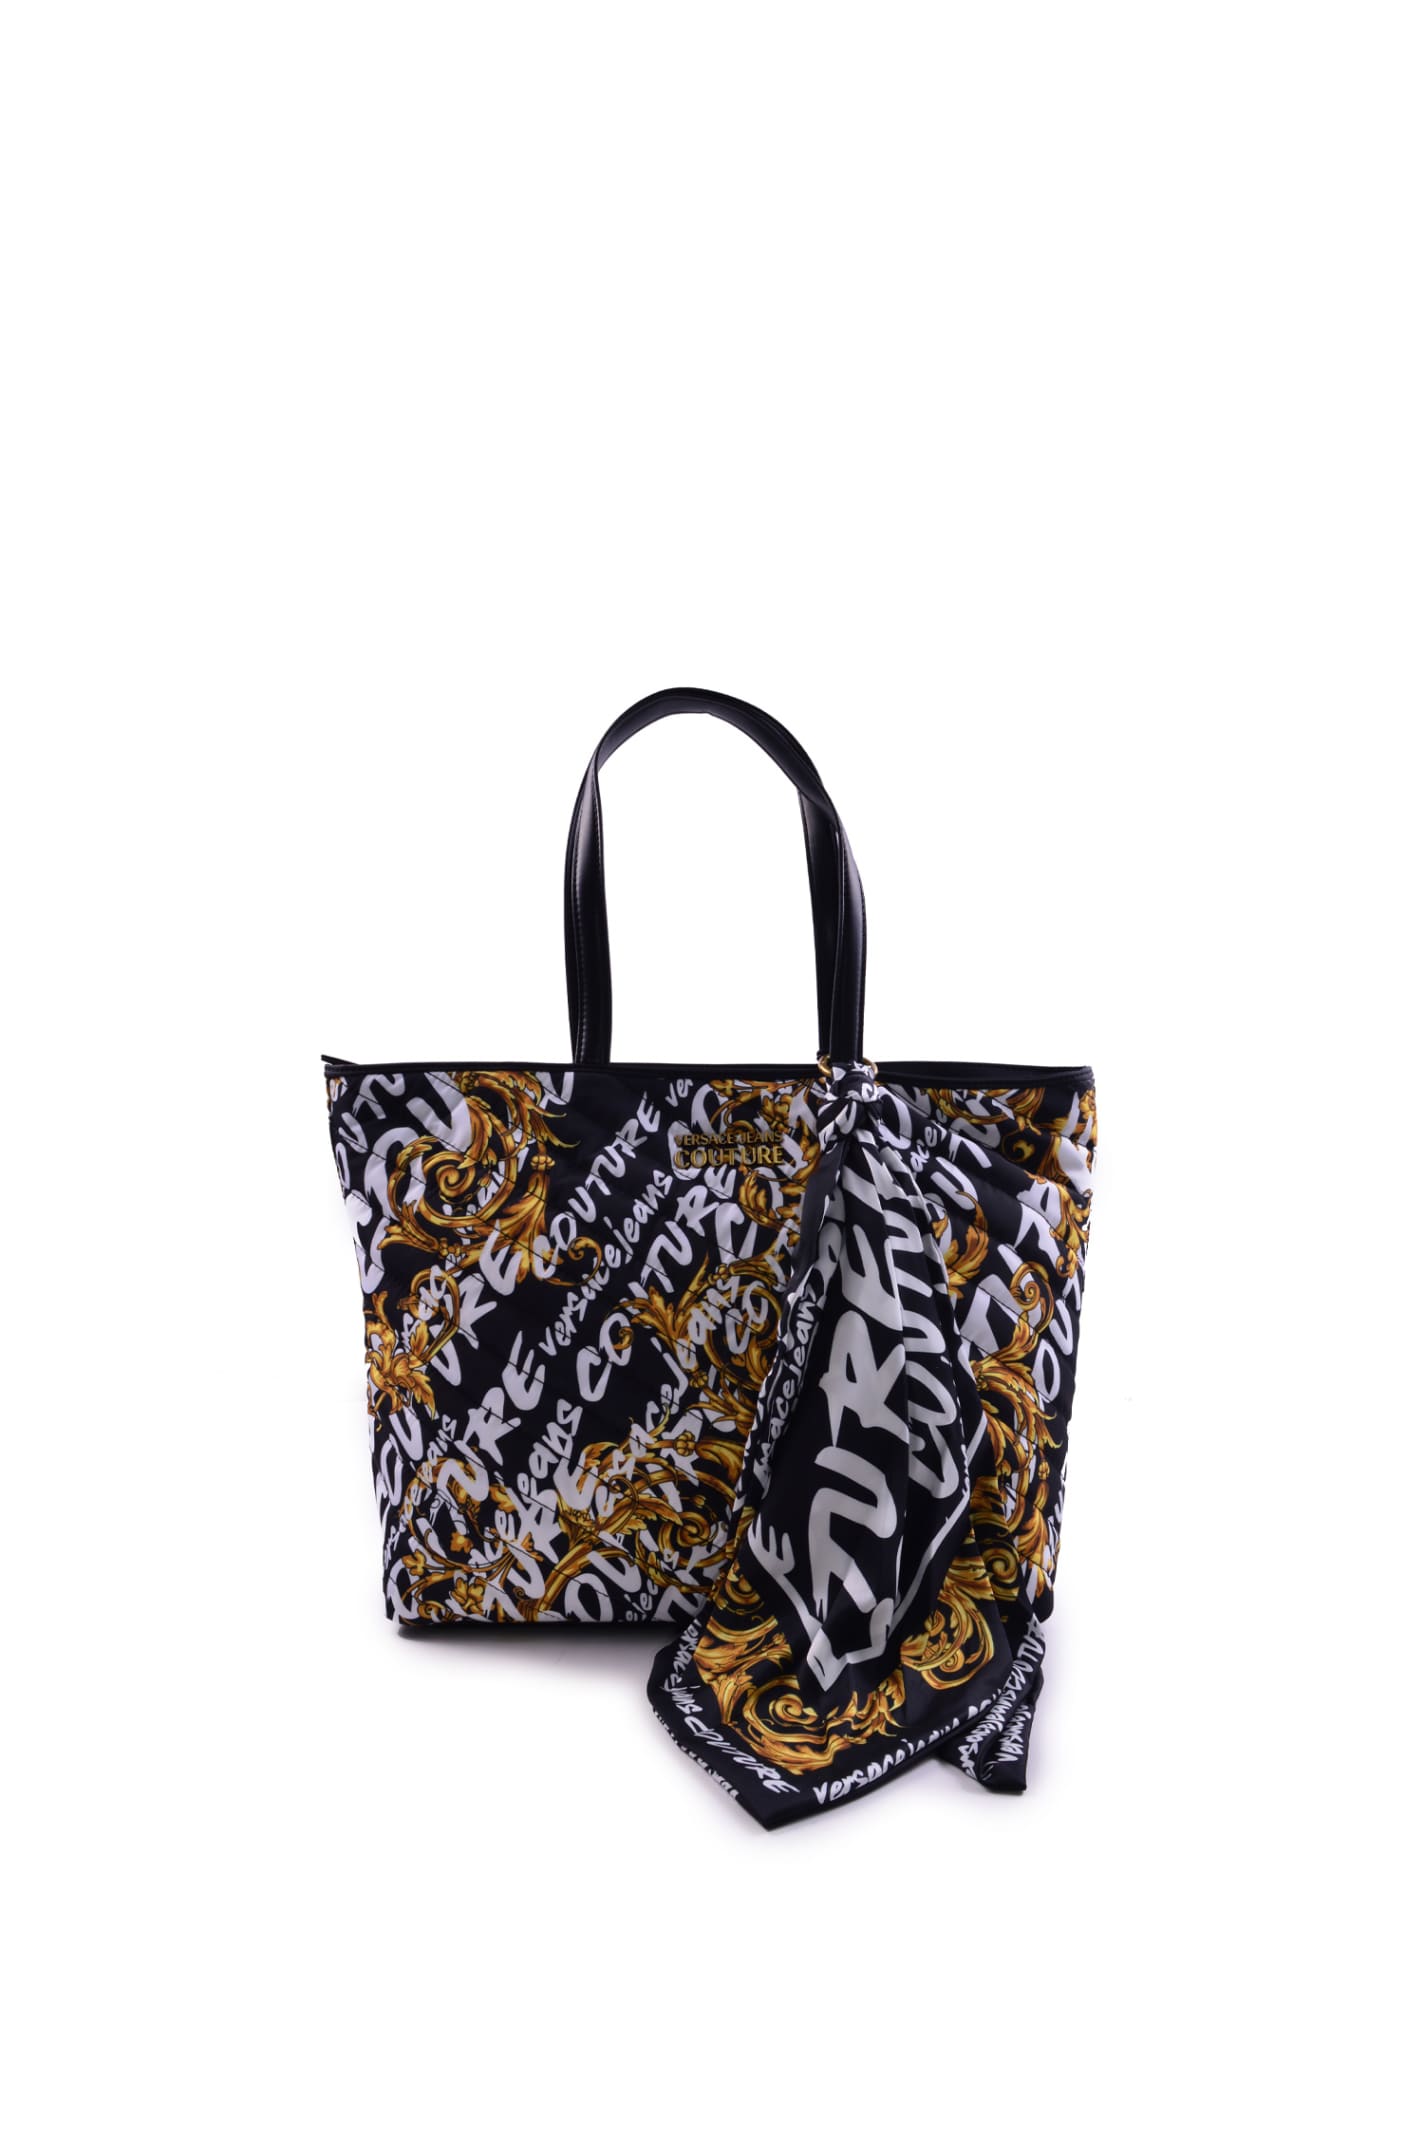 Versace Jeans Couture Bag In Matelasse Nylon